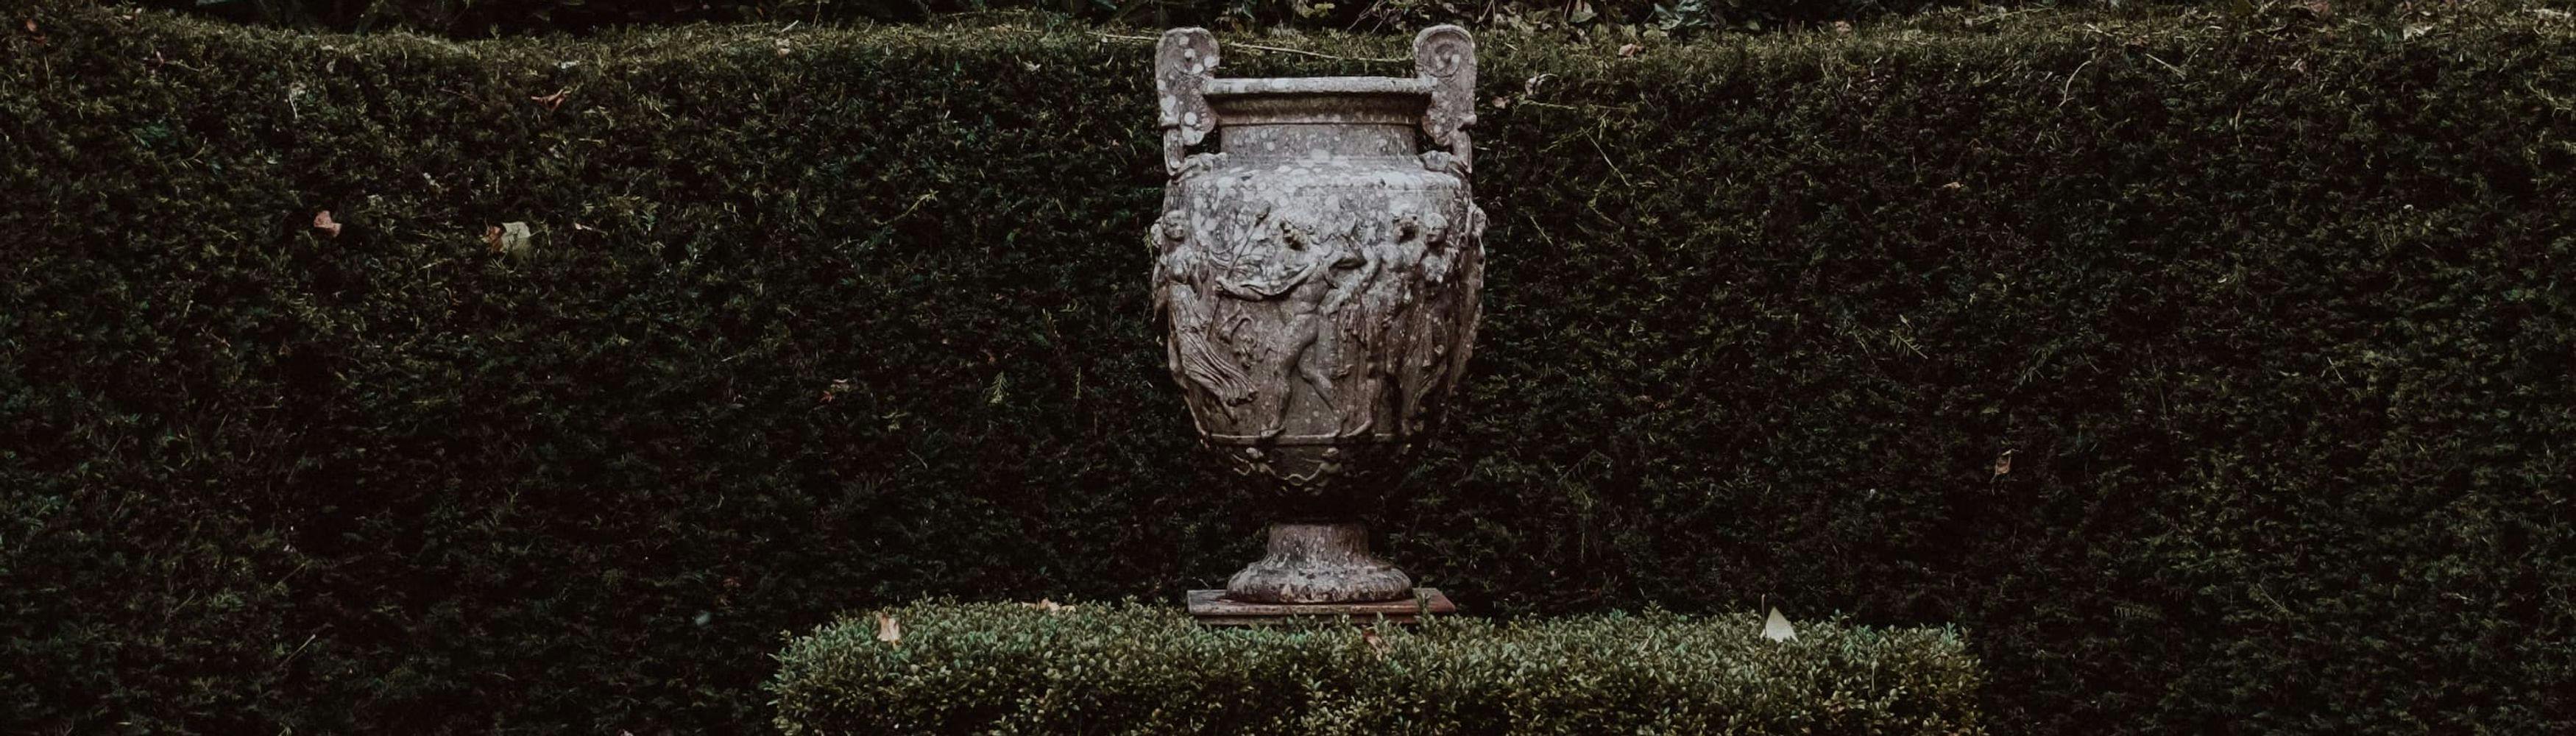 Cover image from Garden with the Stone Garden Urns